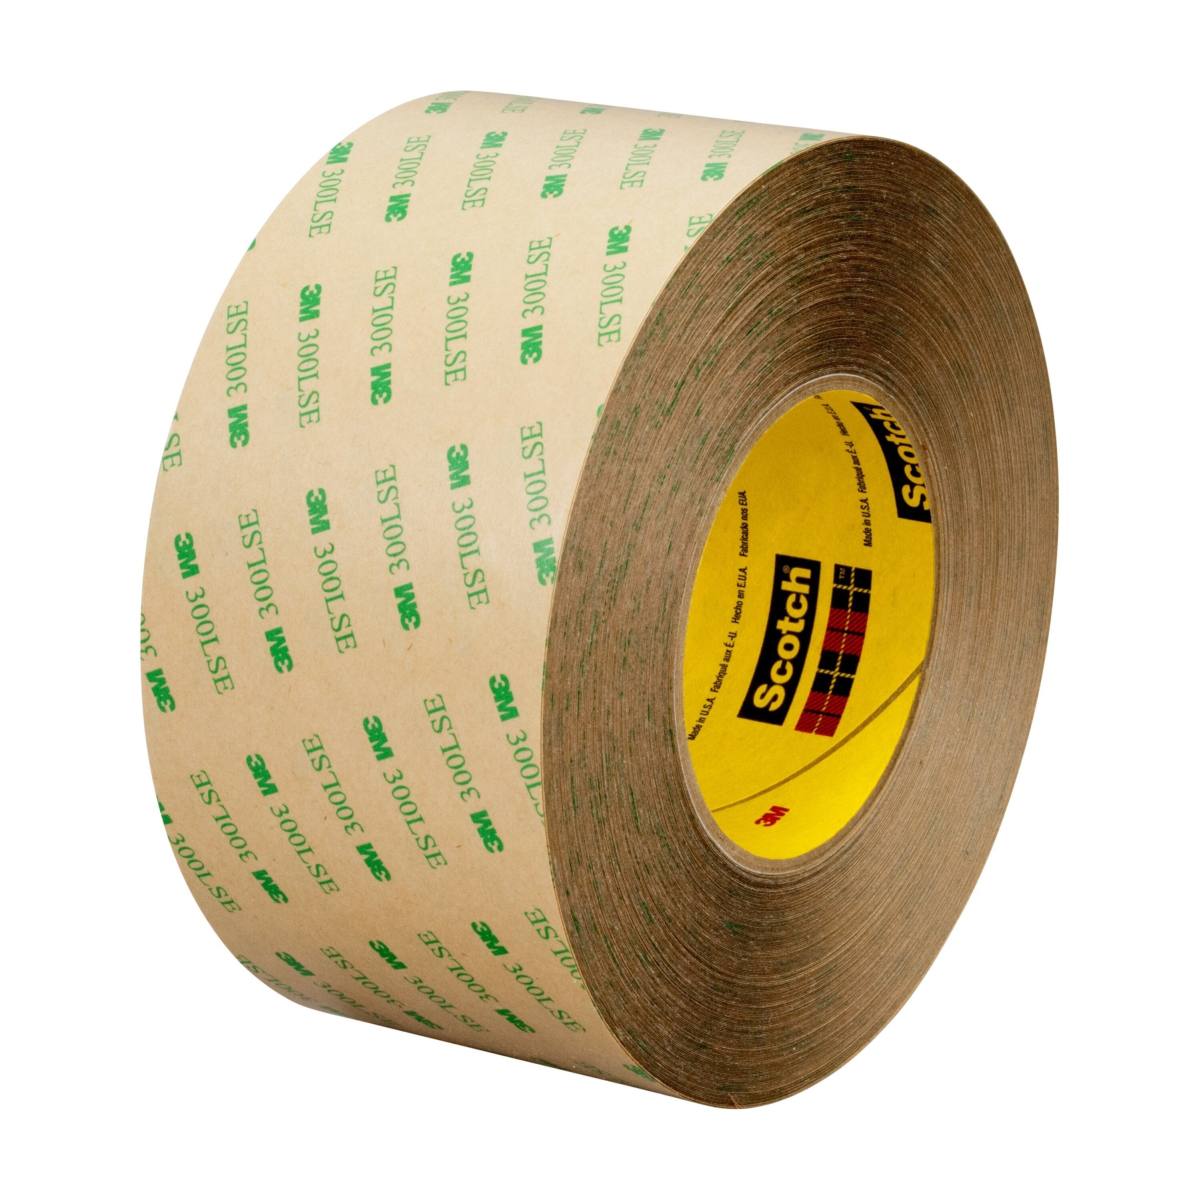 3M Dubbelzijdig plakband met polyester drager 93020LE, transparant, 38 mm x 55 m, 0,20 mm